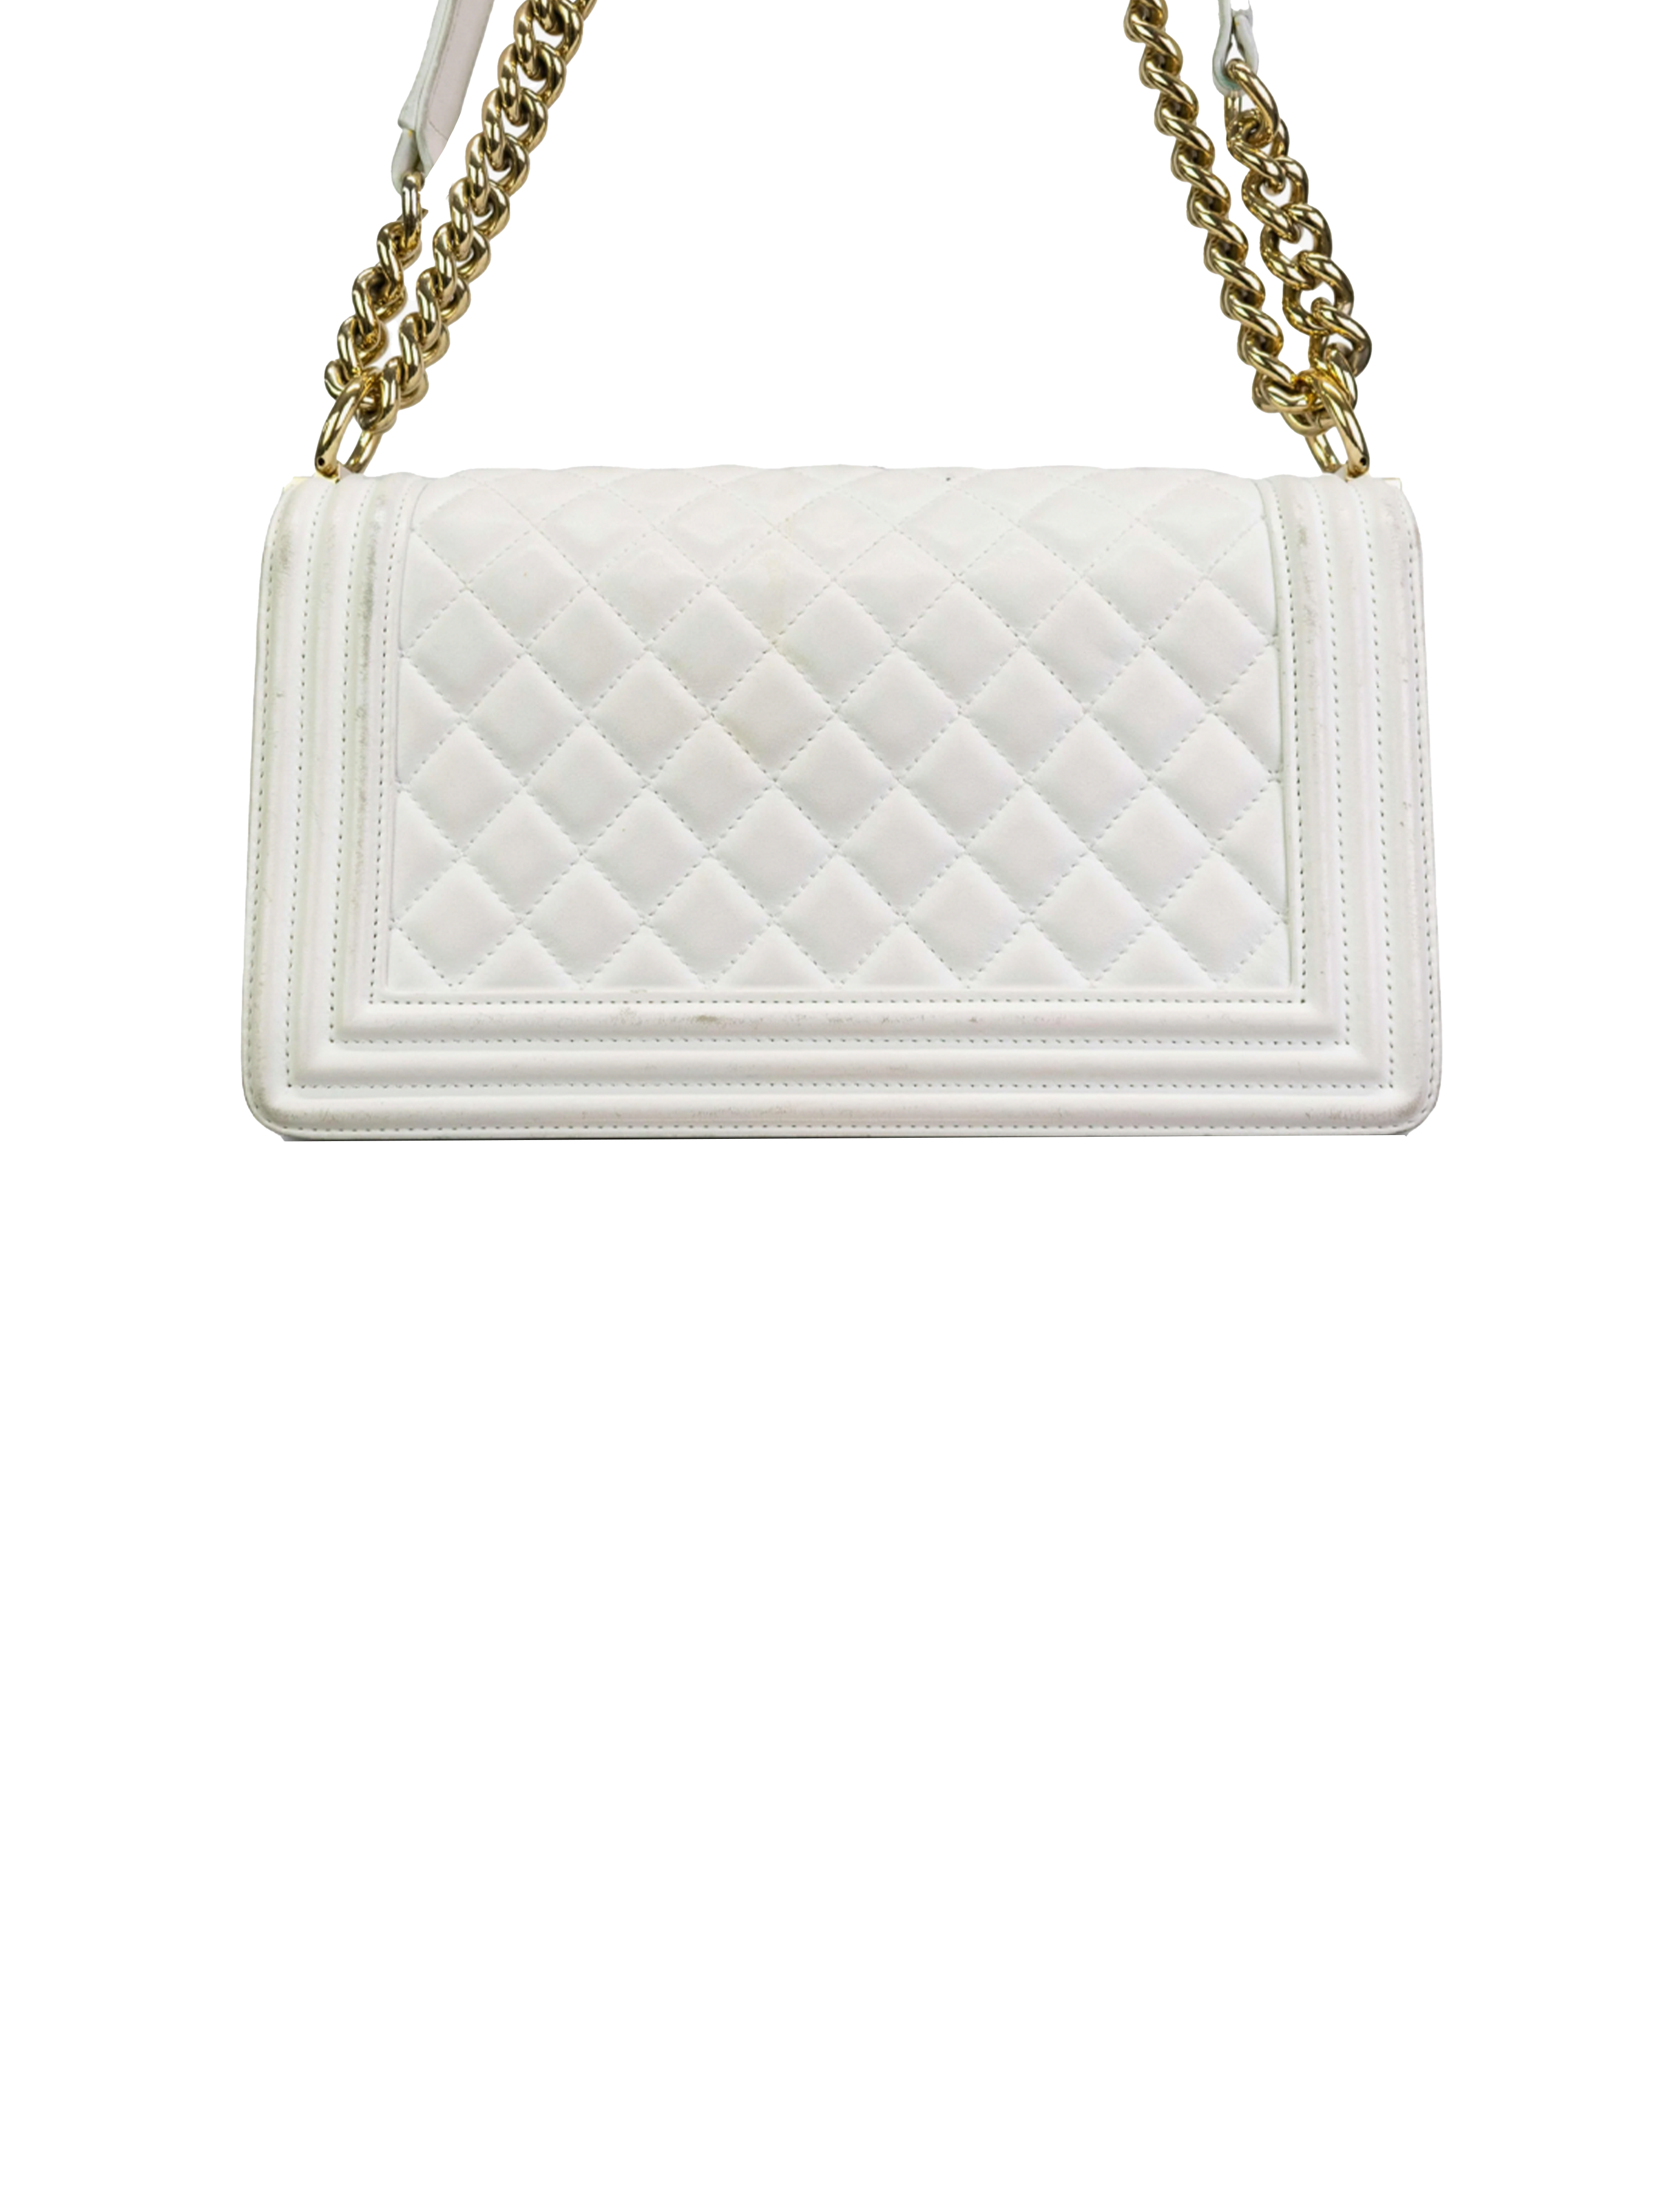 Chanel 2018 White Leather Boy Bag · INTO